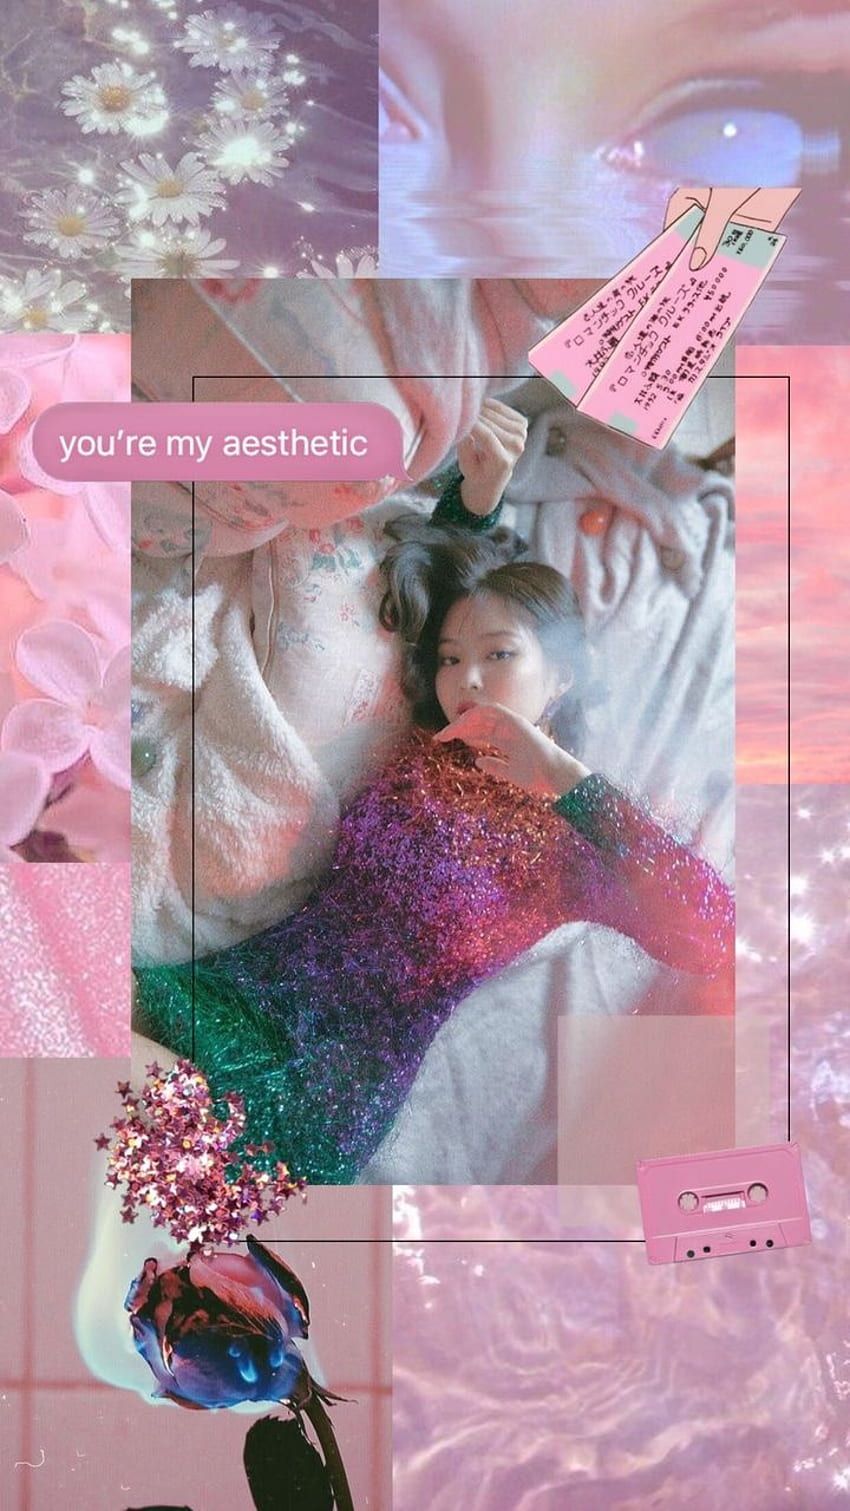 Aesthetic background image with a girl and a cassette tape - Jennie